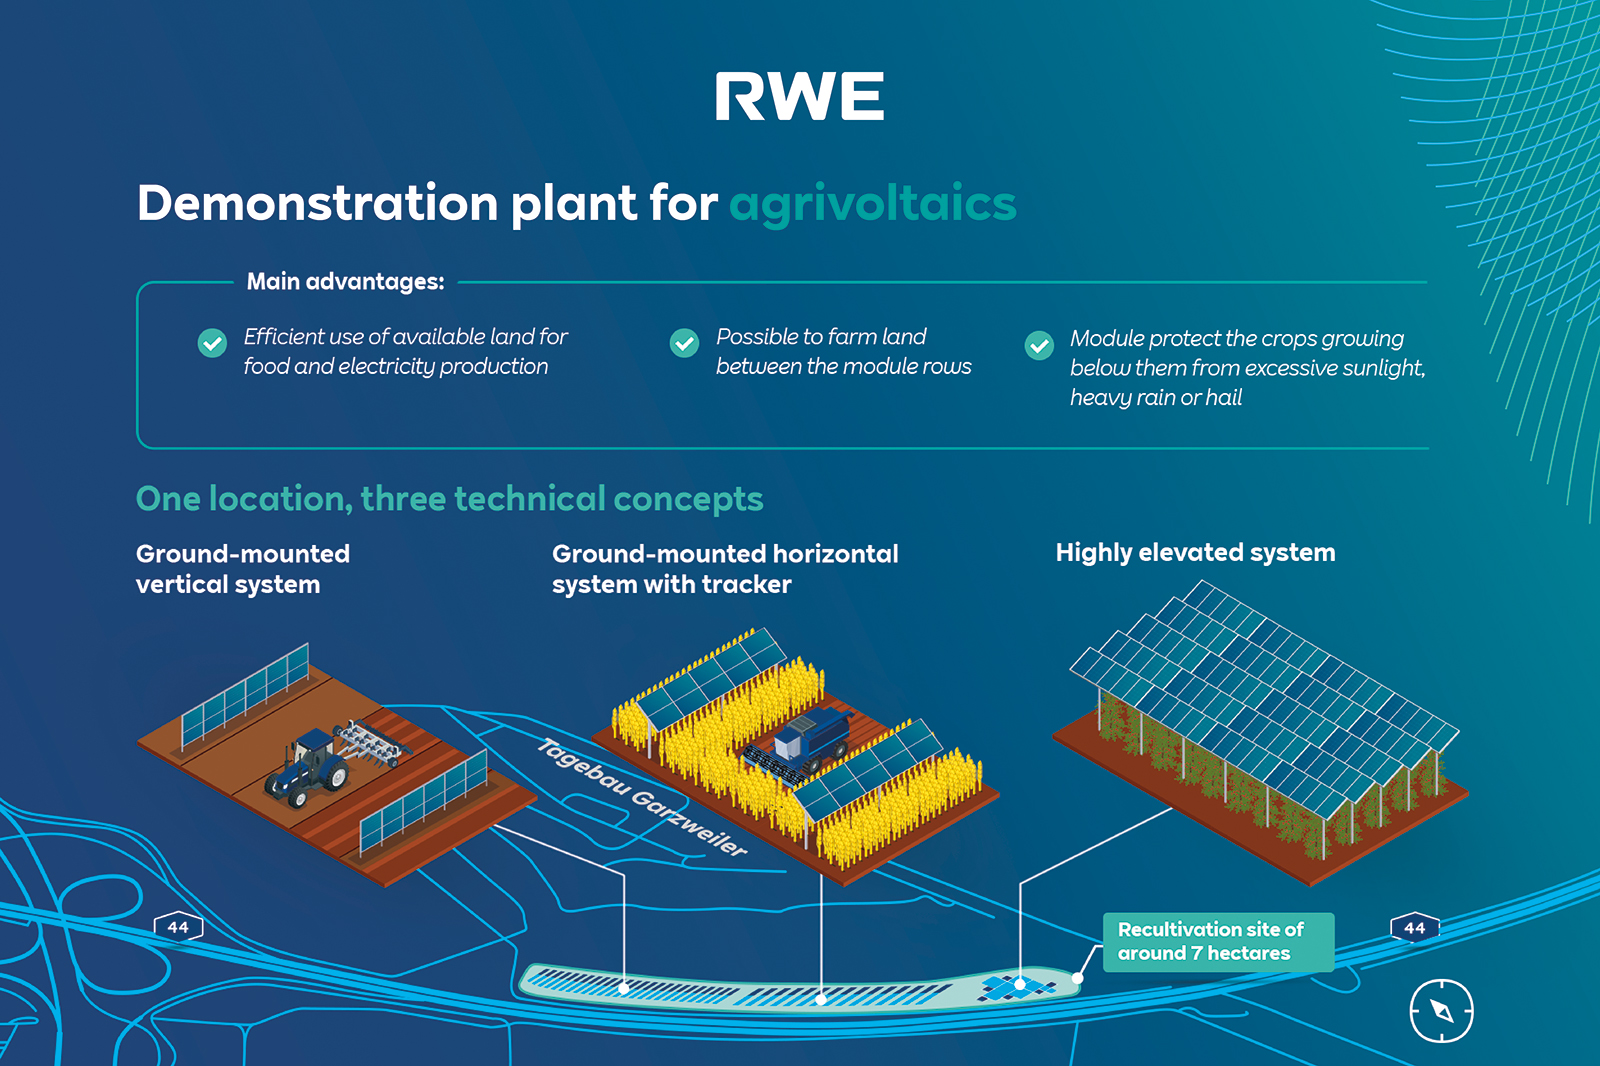 Jülich expertise for new agri-photovoltaic plant in the Rhenish mining area